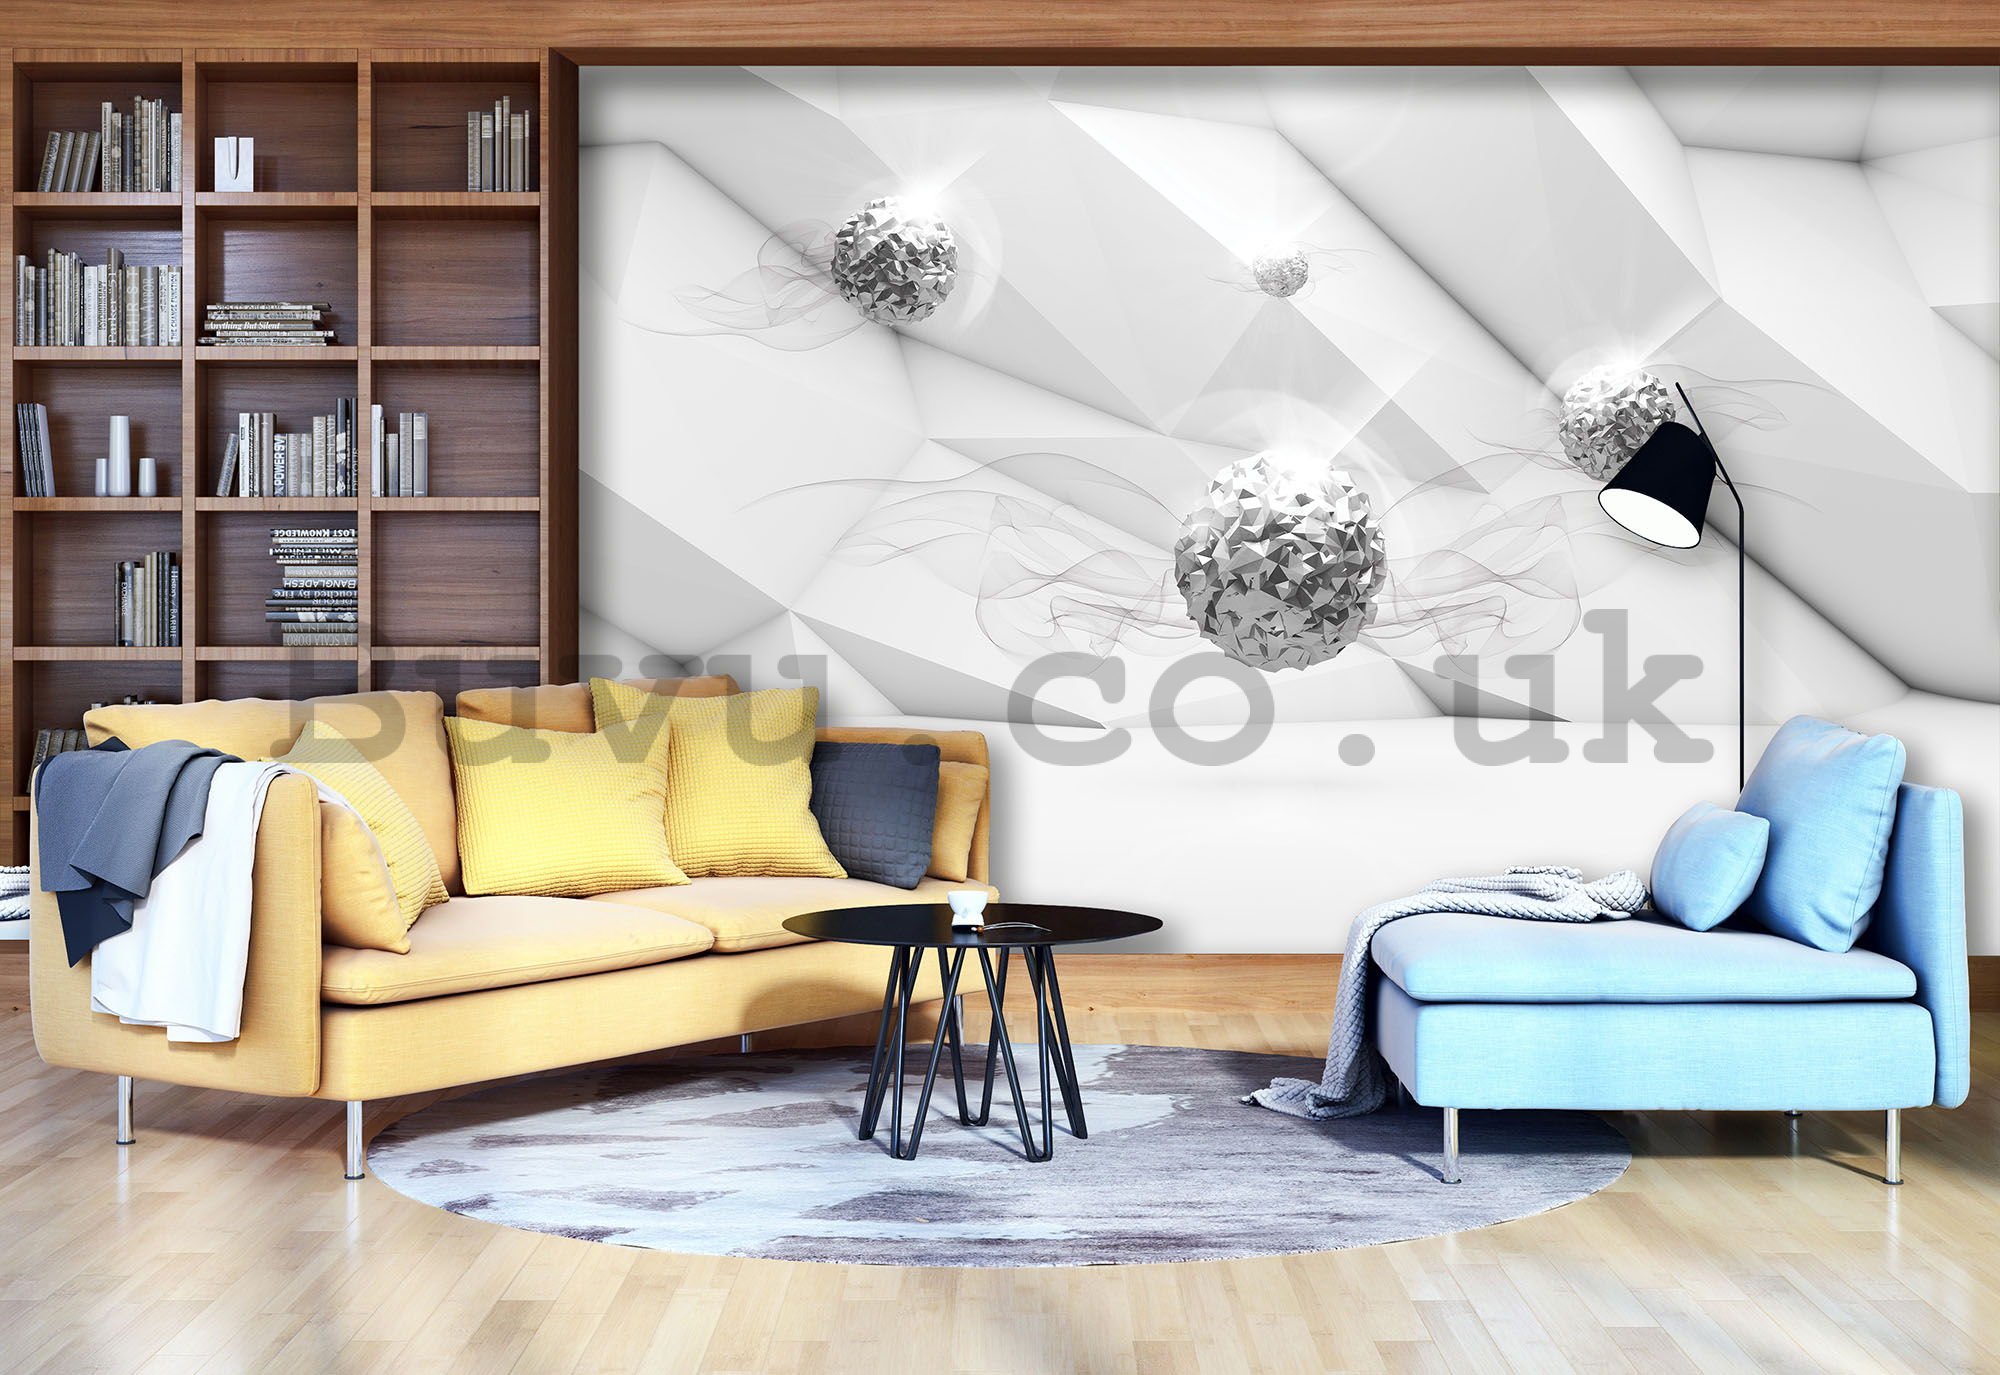 Wall mural vlies: Spherical Abstraction (1) - 254x368 cm